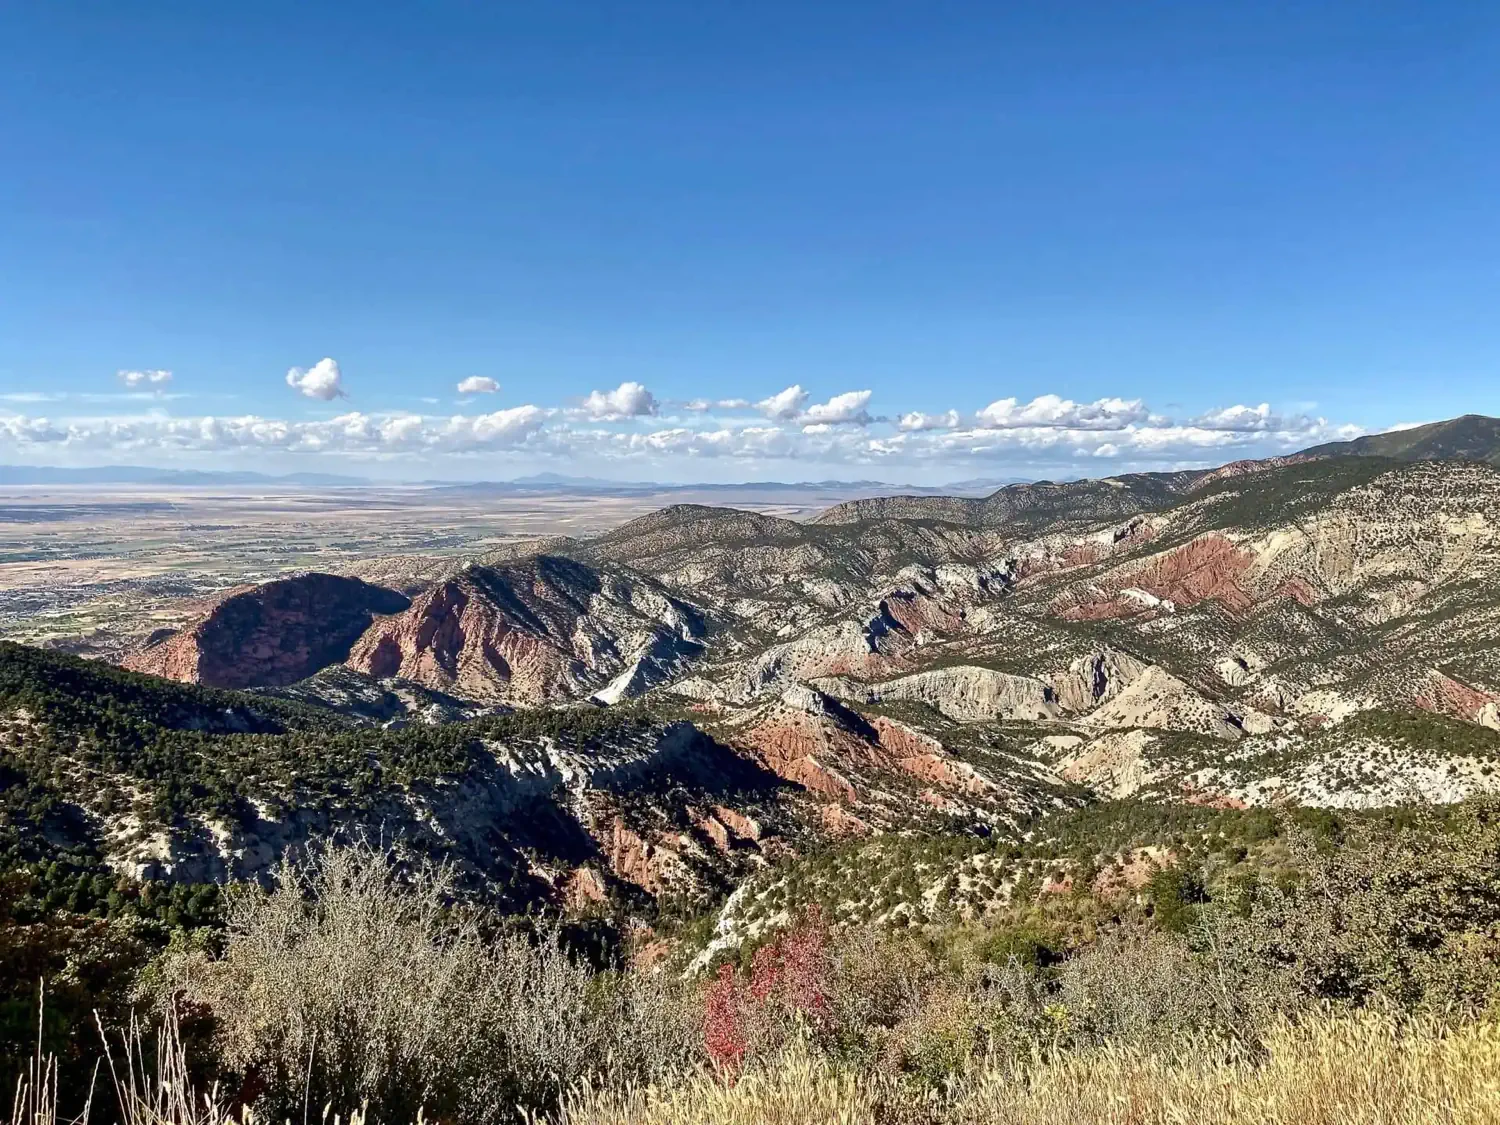 A spectacular overlook near the start of the Kolob Plateau drive